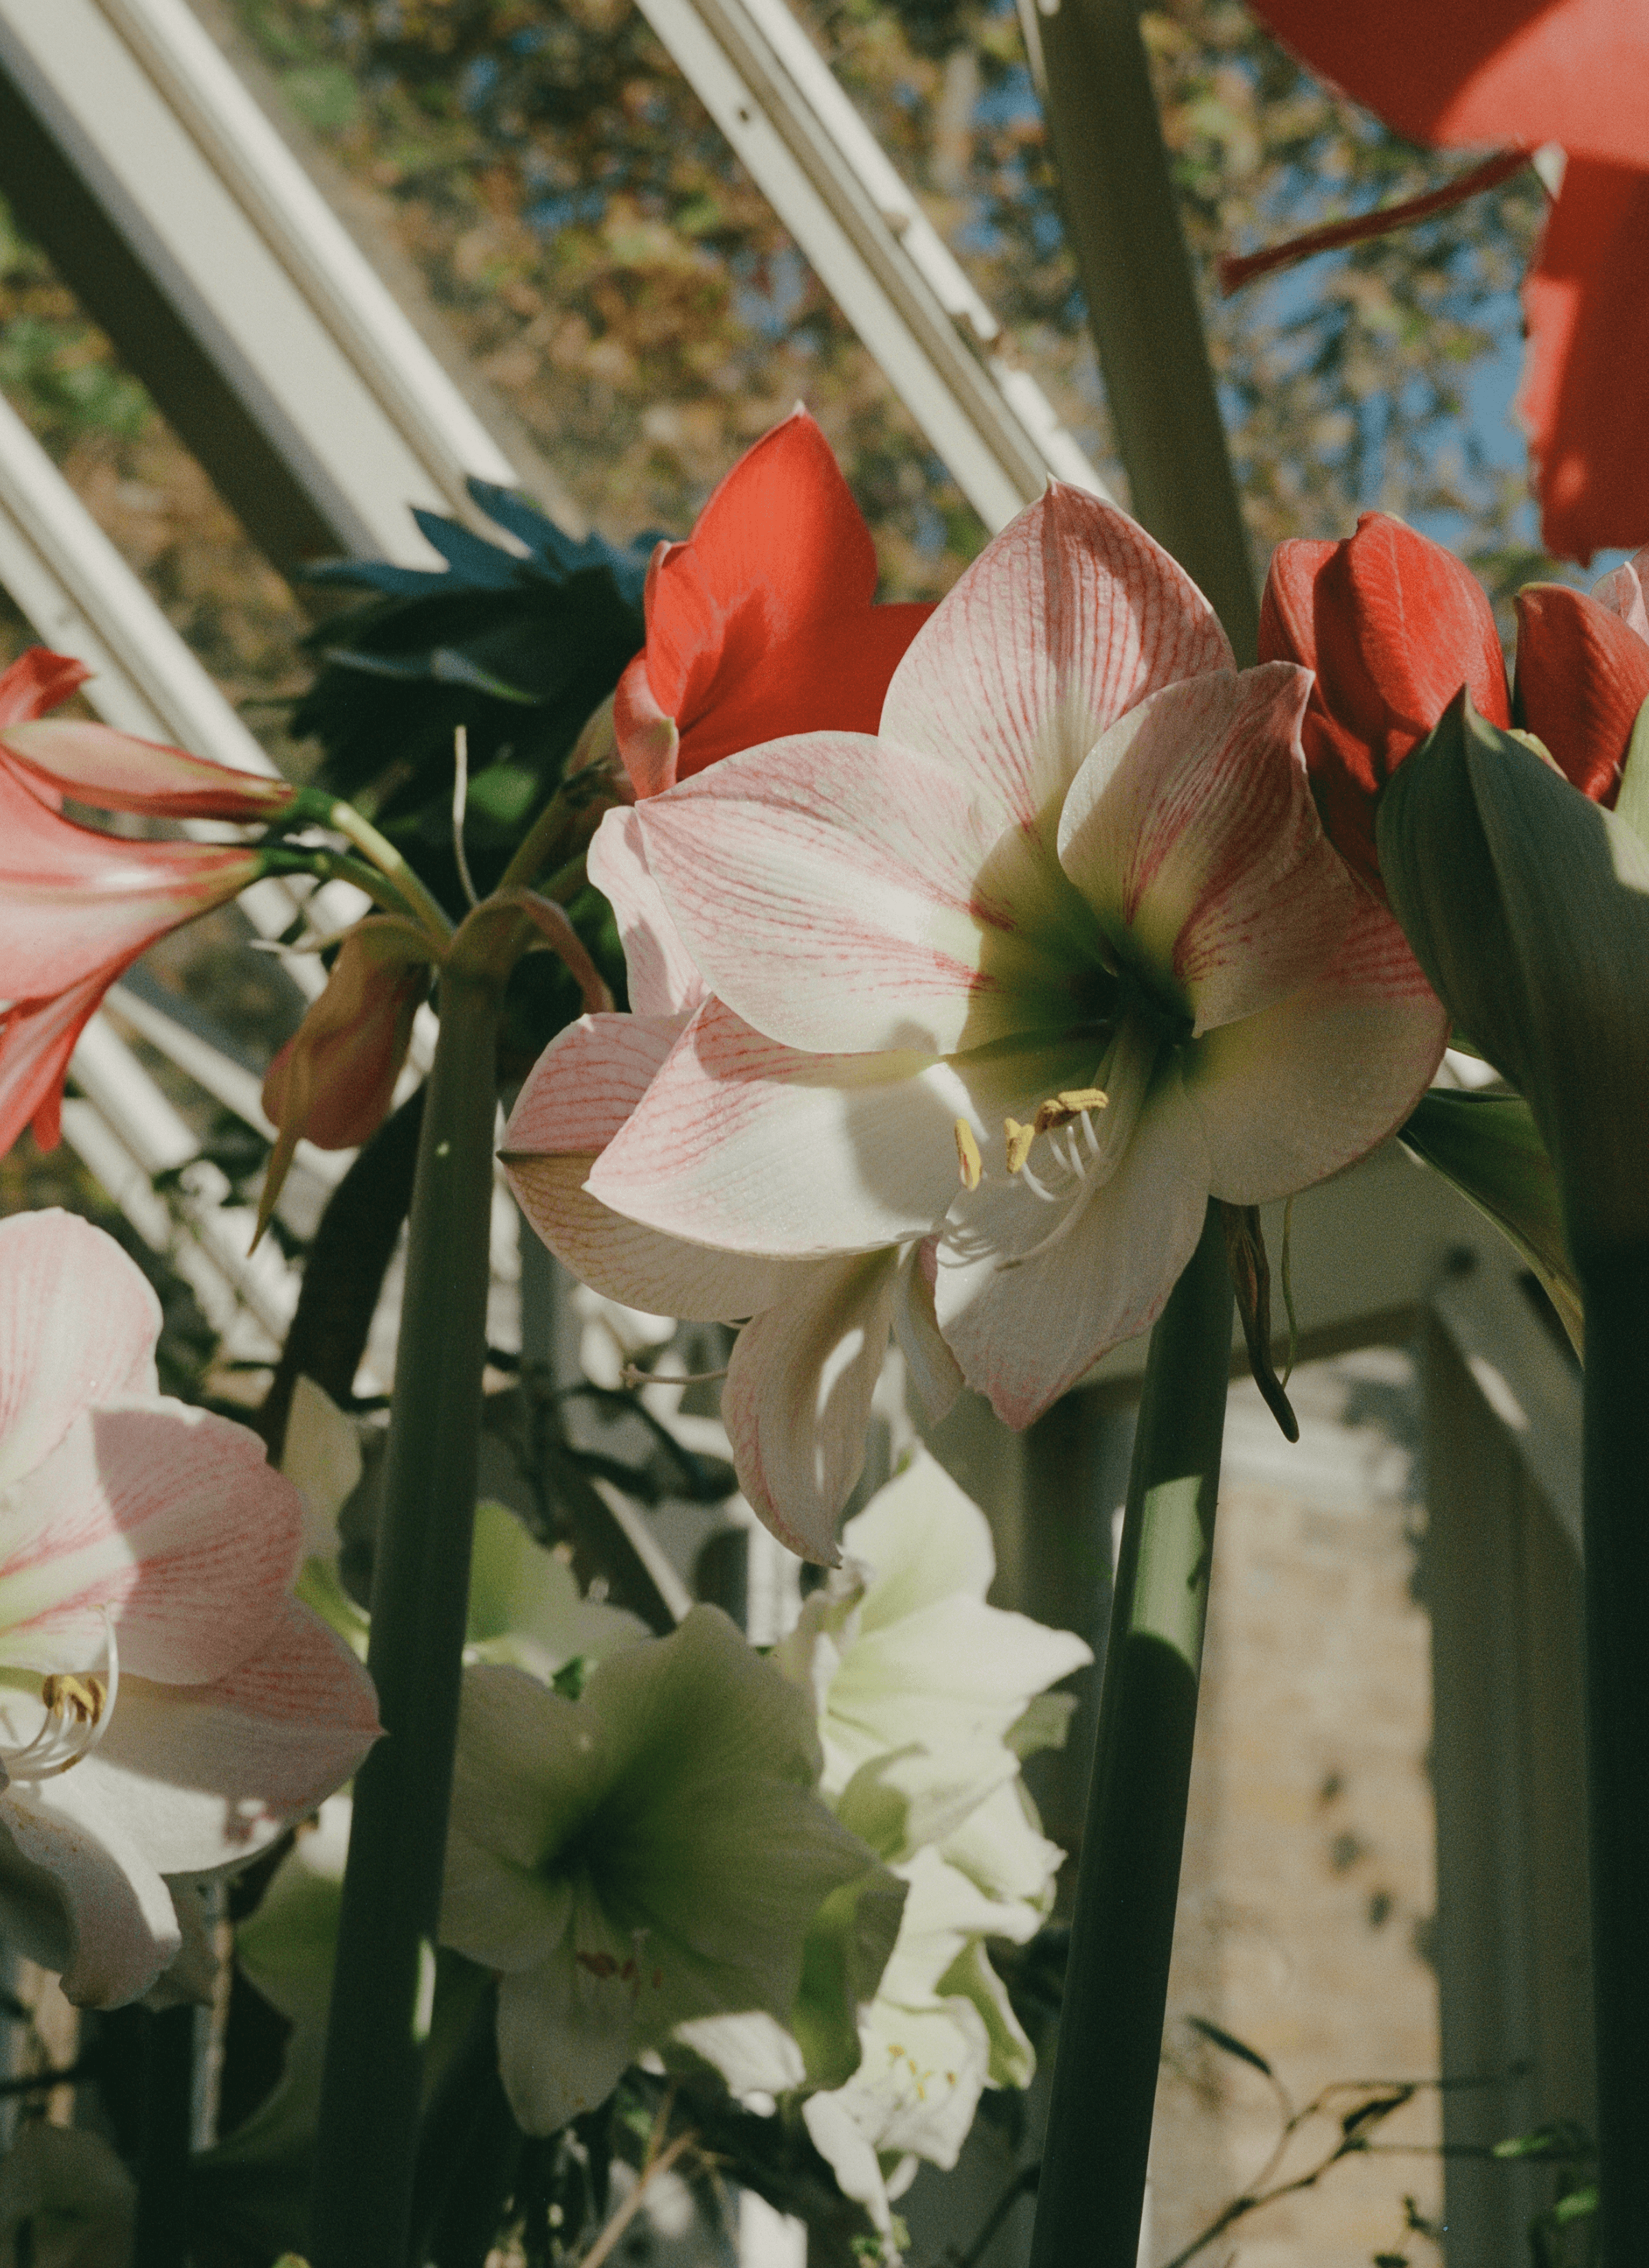 Different colours of Amaryllis, photography specifically focuses on the white with pink string patterns Amaryllis.